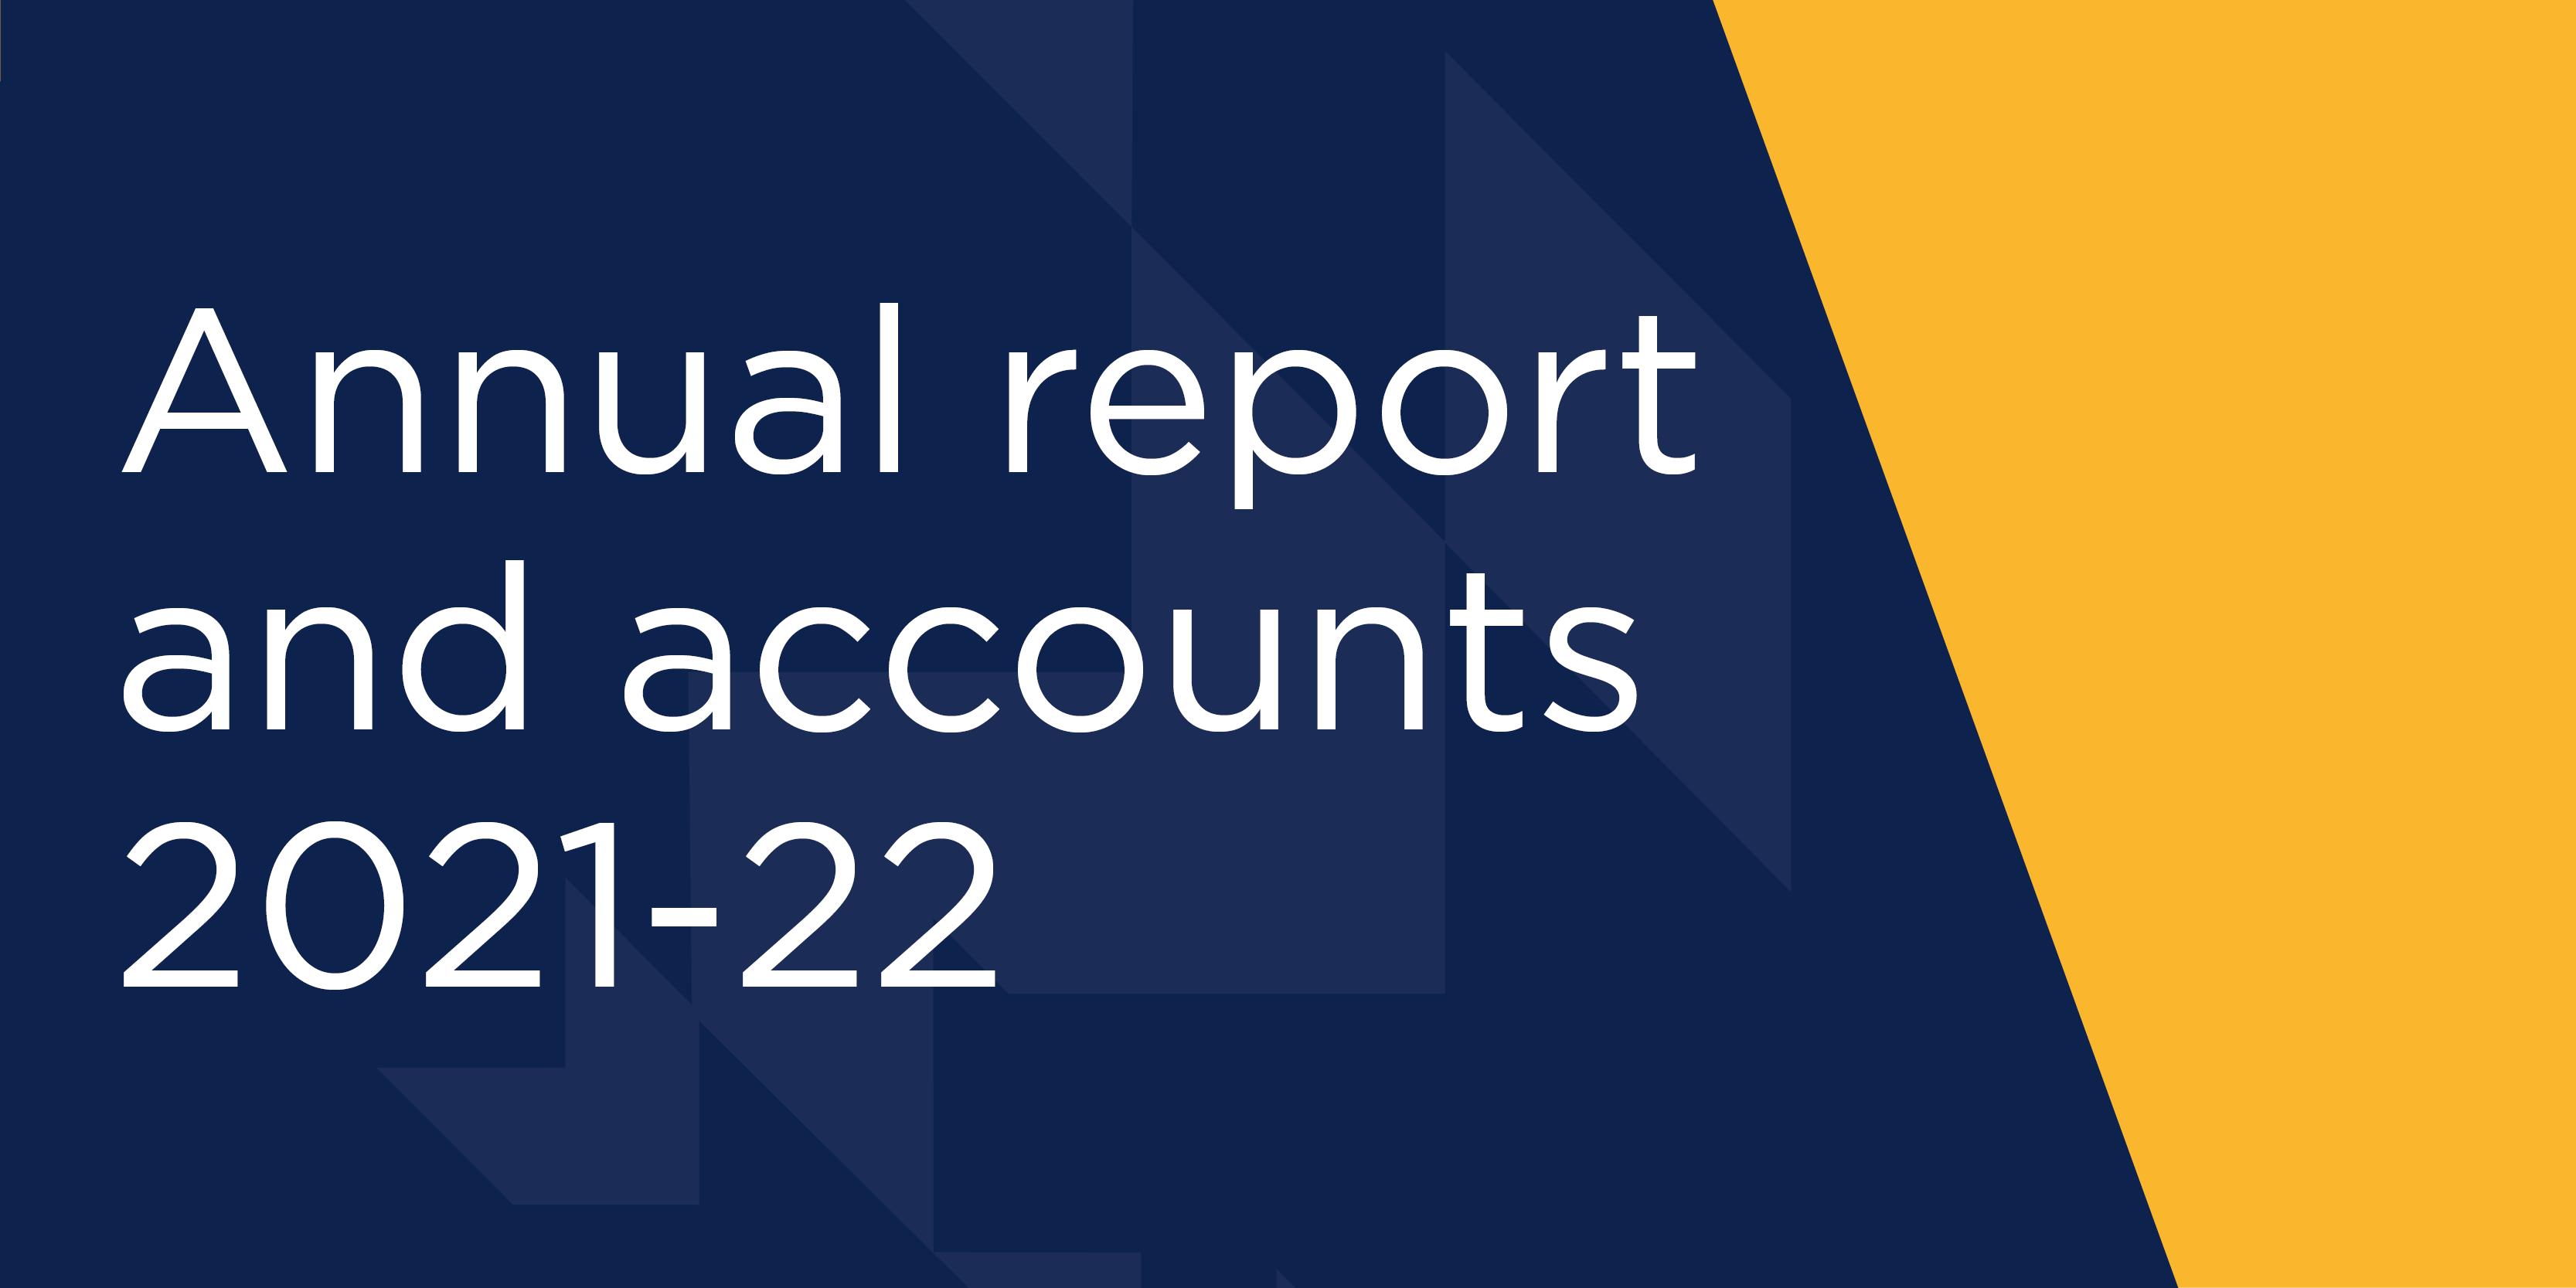 Annual report and accounts 2021-22